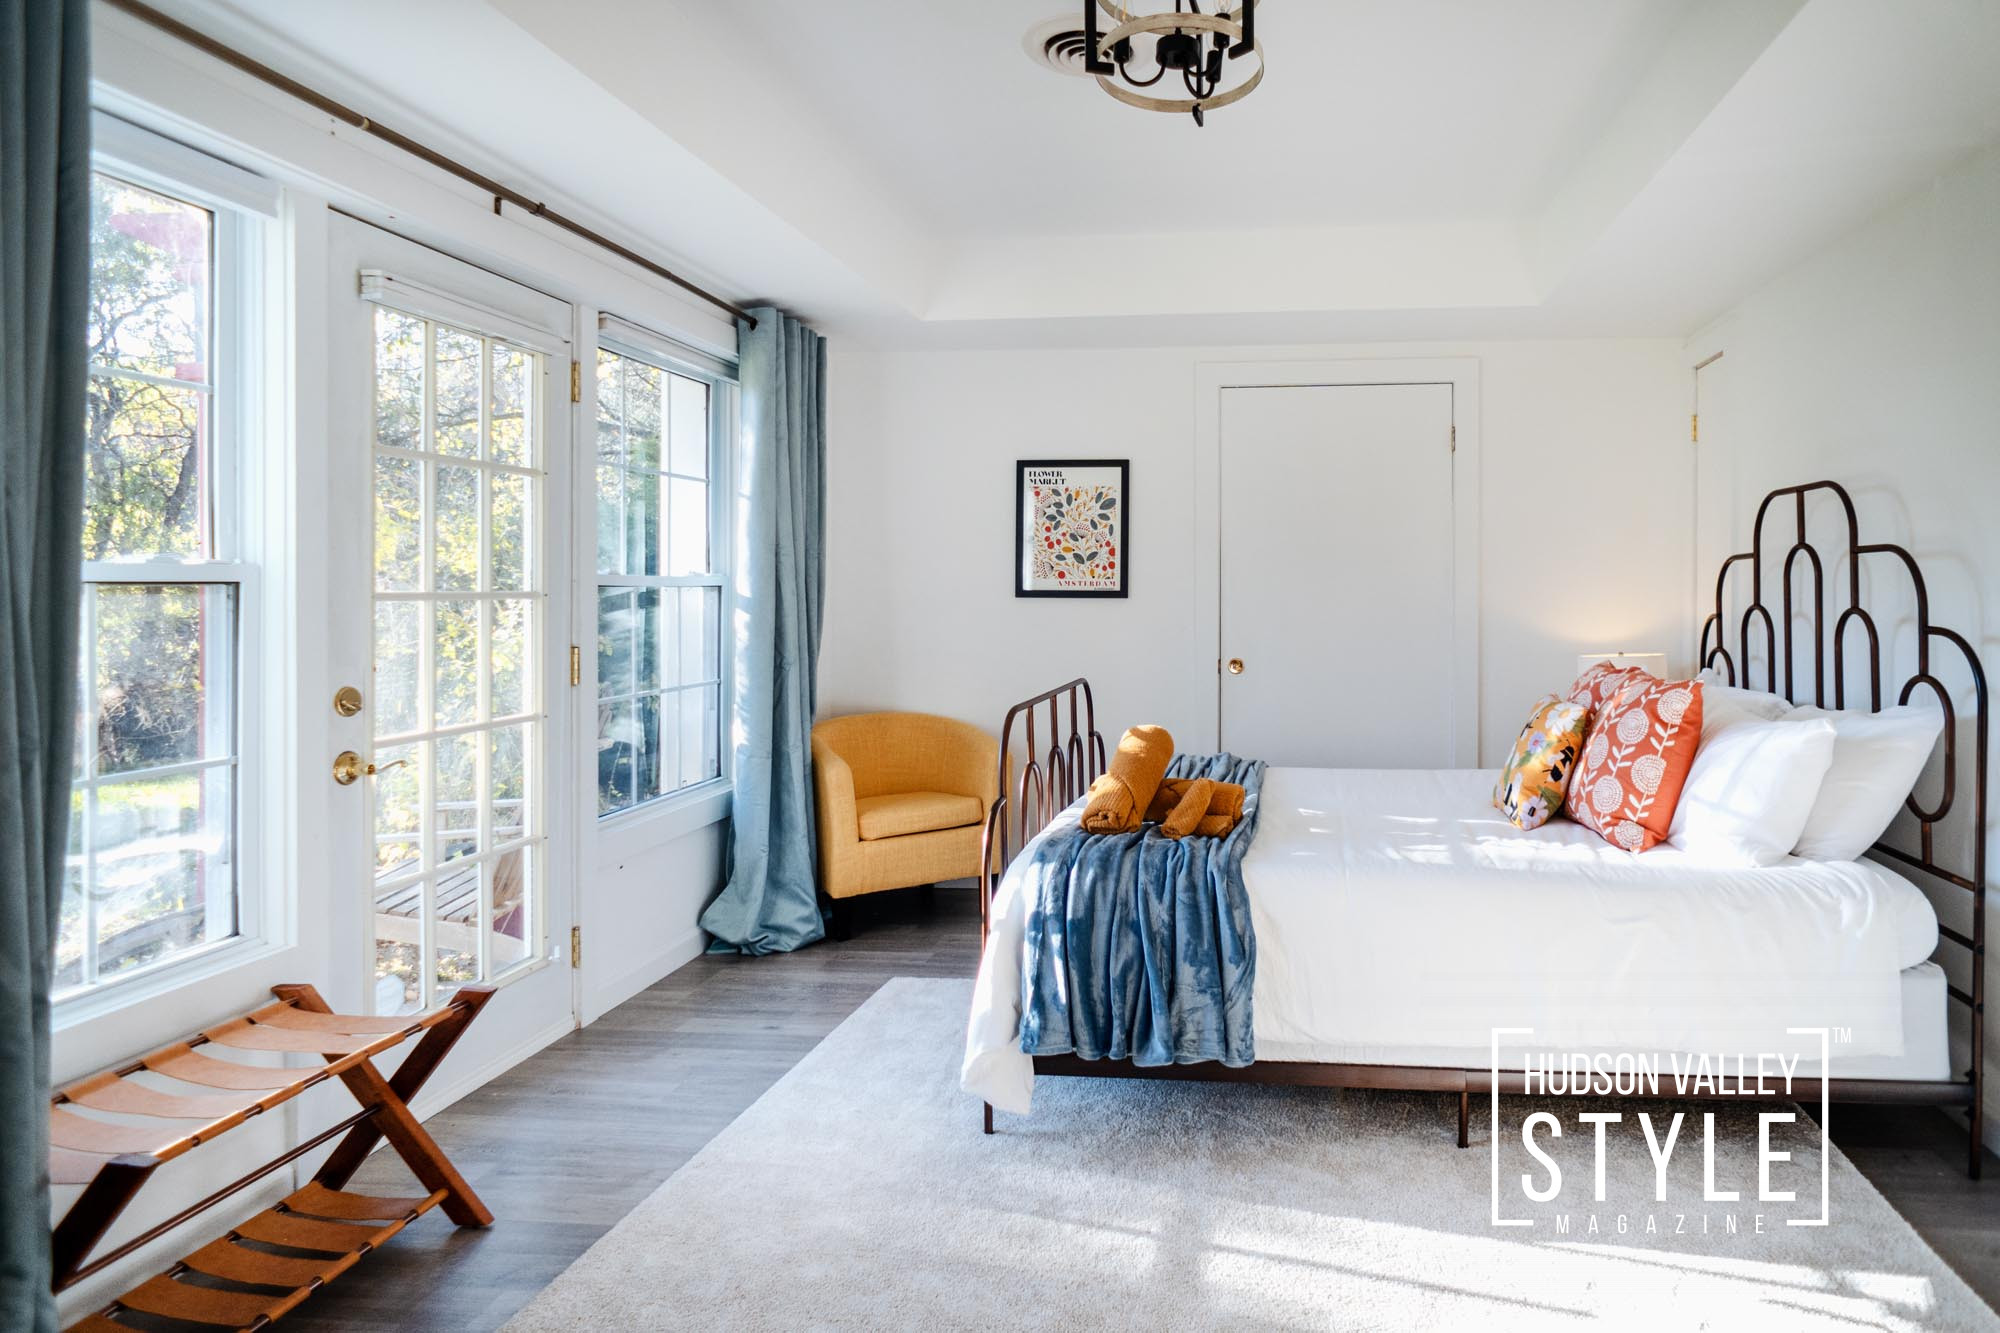 The story of the Bugg Haus – Hudson Valley's newest Airbnb listing and the perfect place for people who love nature – by Meredith Pace, Bugg Haus – Photography by Alluvion Media